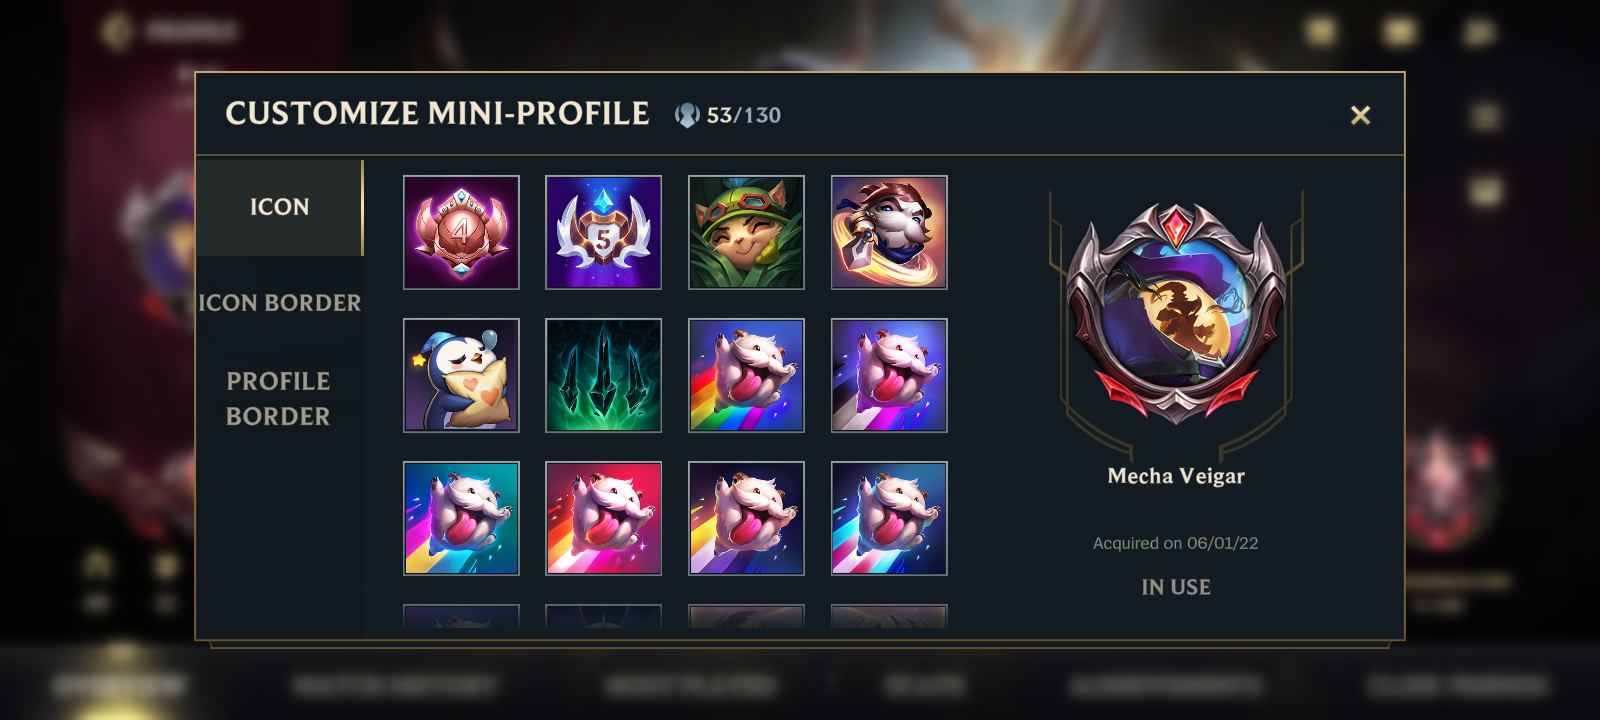 SOLD - NA, Grandmaster mid 270+ lp 58%+ winrate, *recovery info*